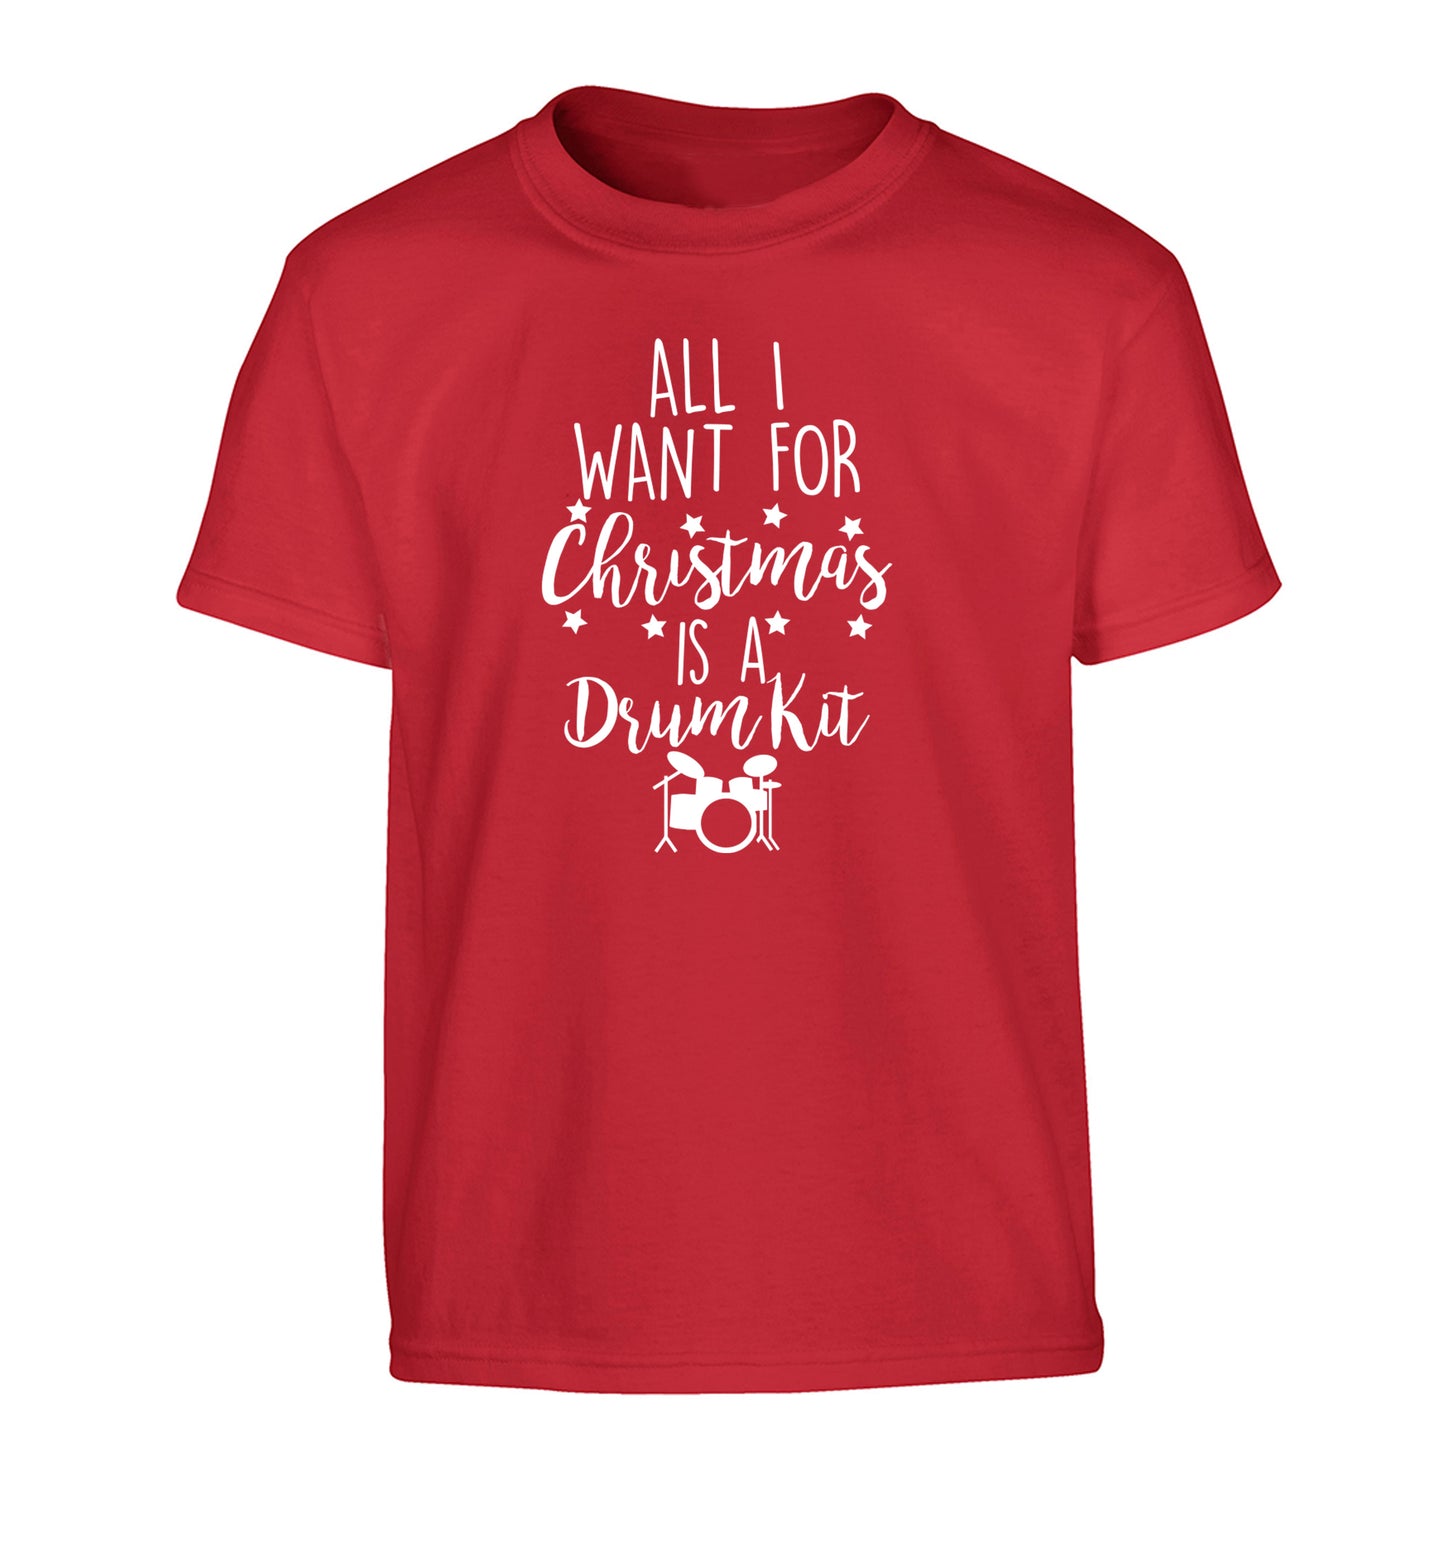 All I want for Christmas is a drum kit! Children's red Tshirt 12-14 Years